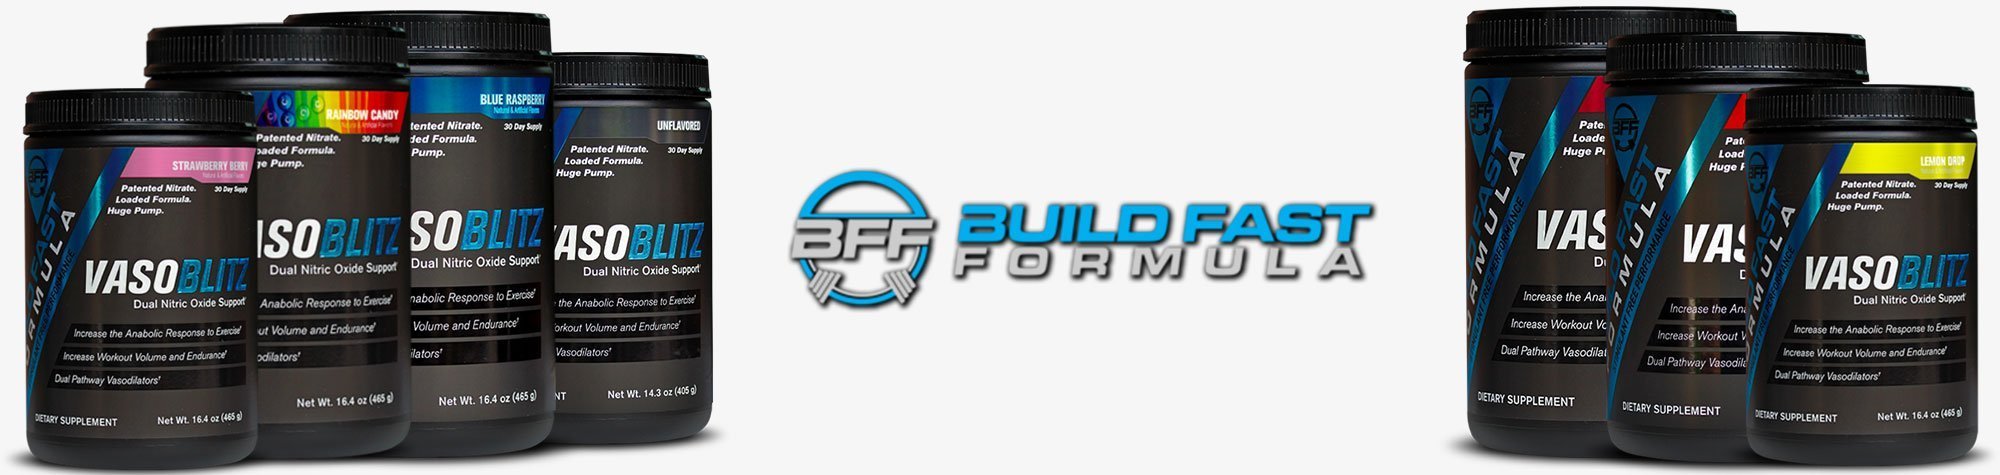 Build Fast Formula Brand Page